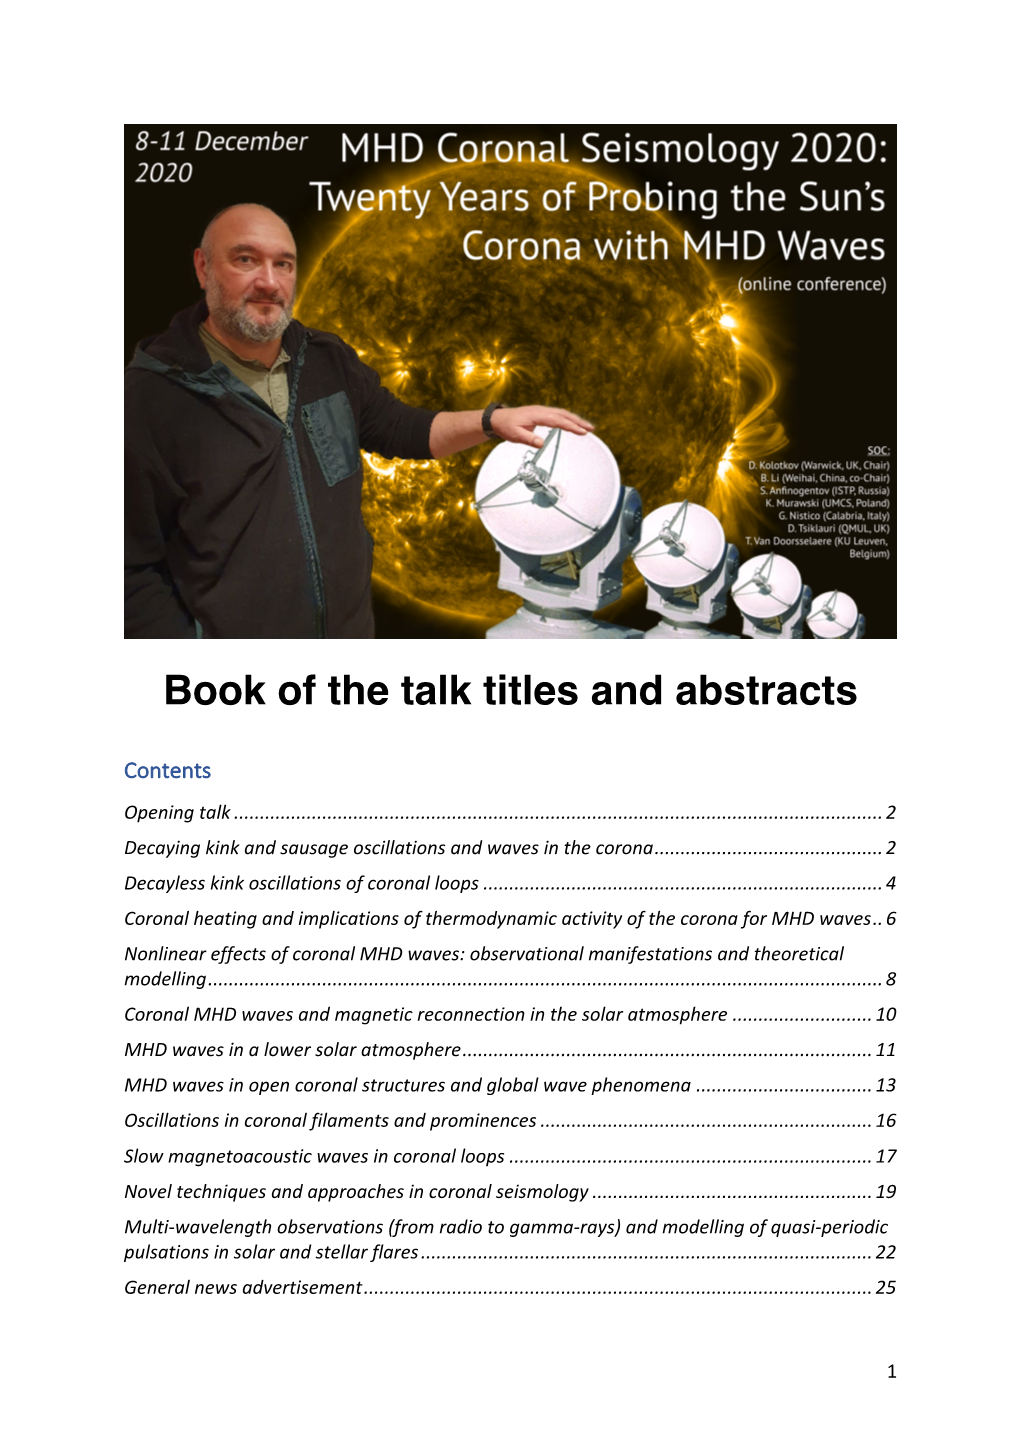 Book of the Talk Titles and Abstracts